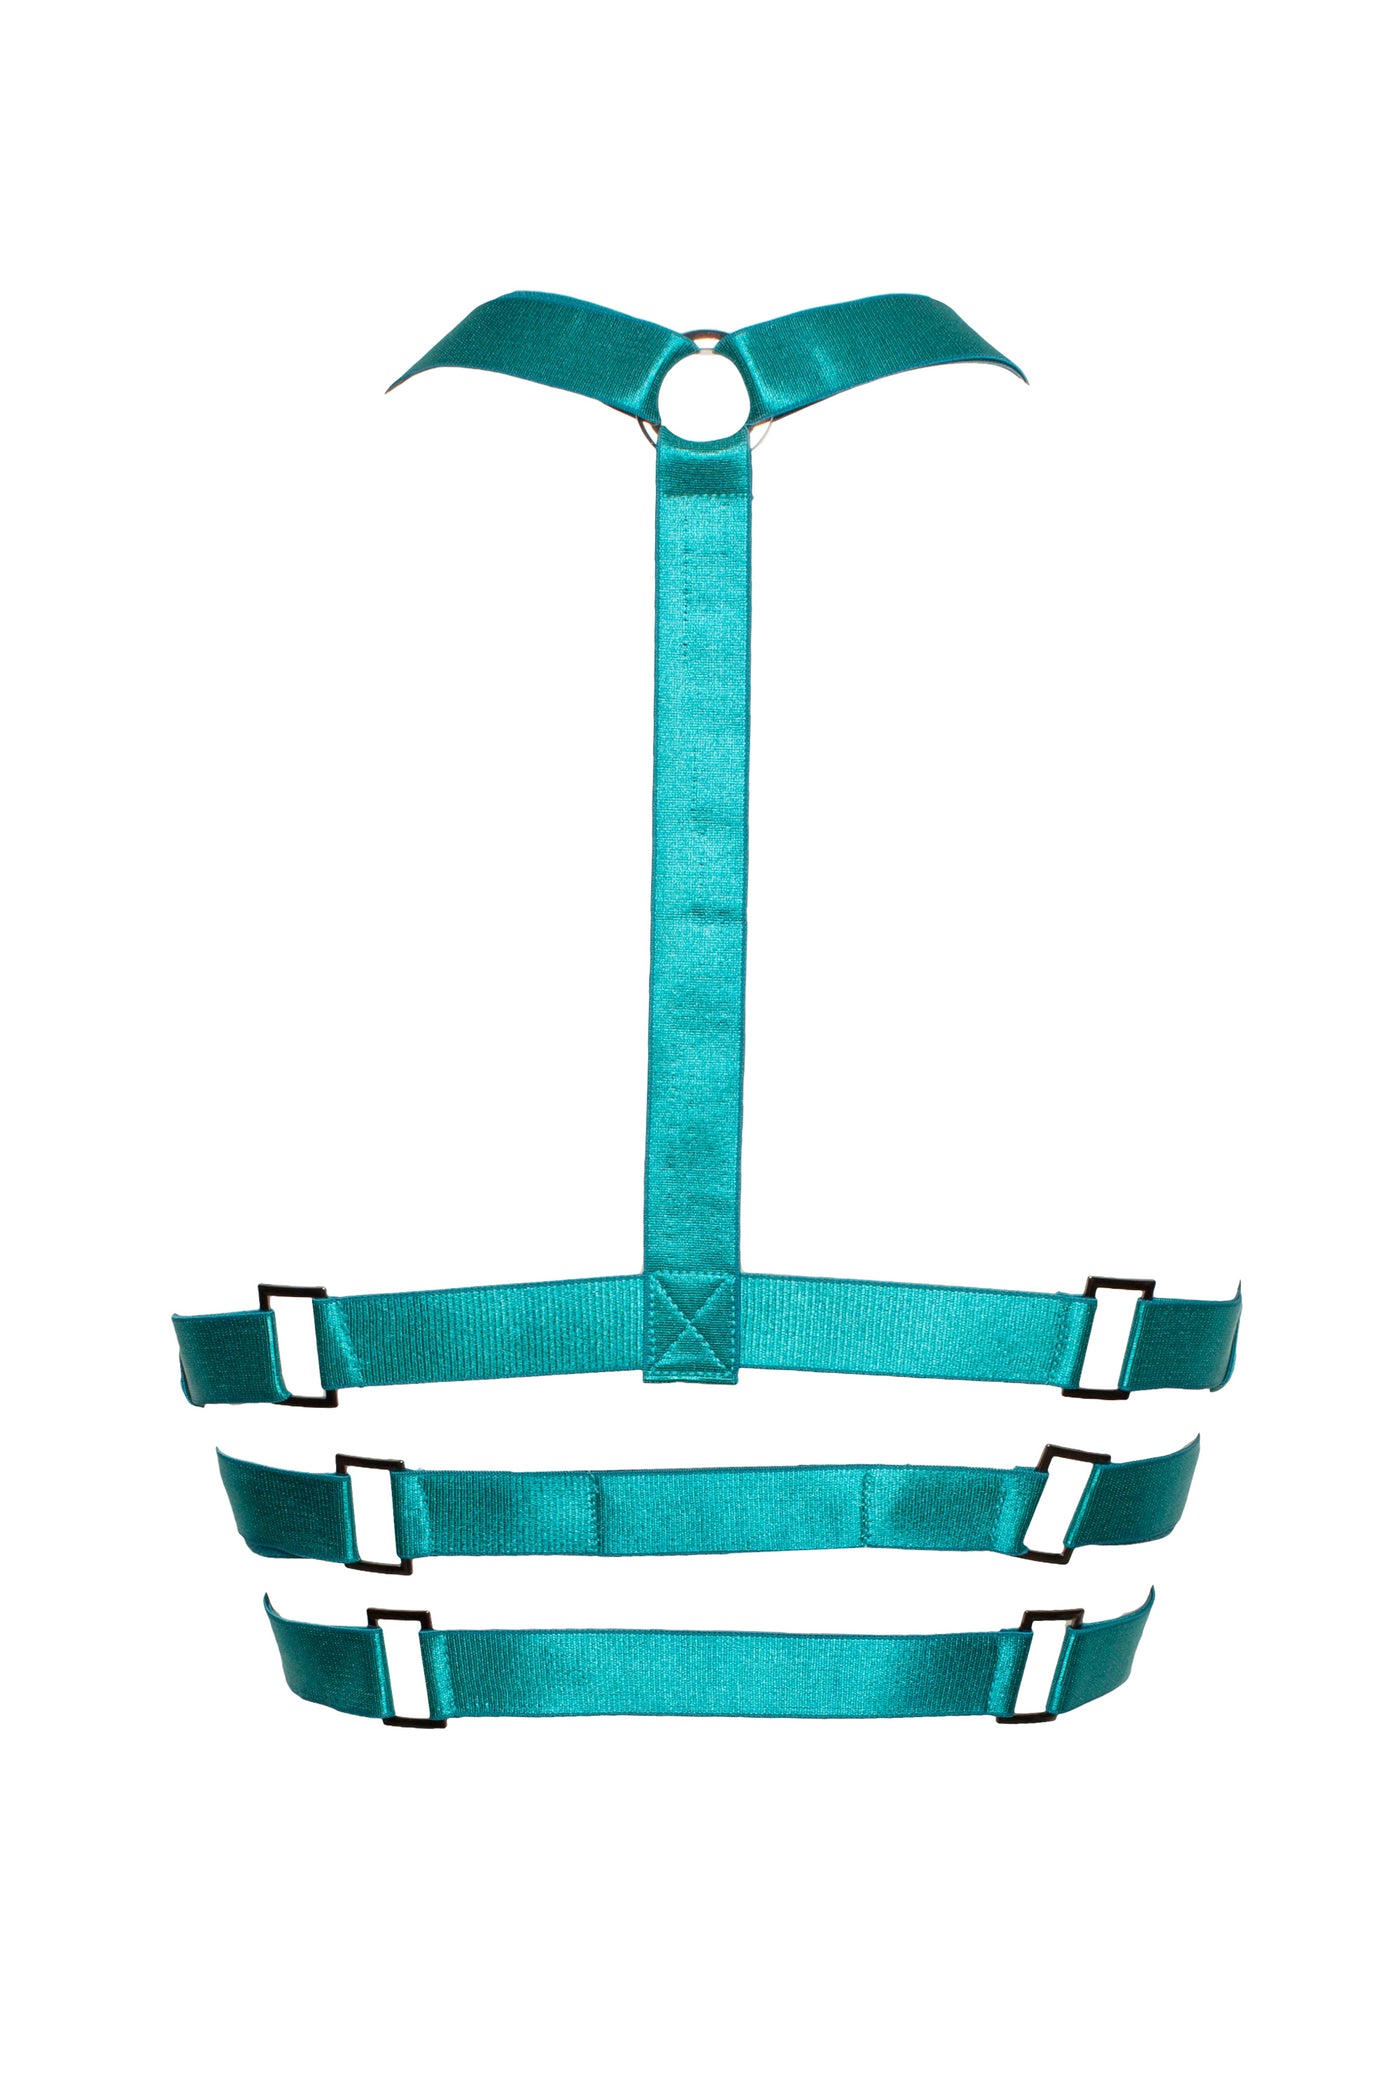 Devil's Clutch Bust Harness (Teal)